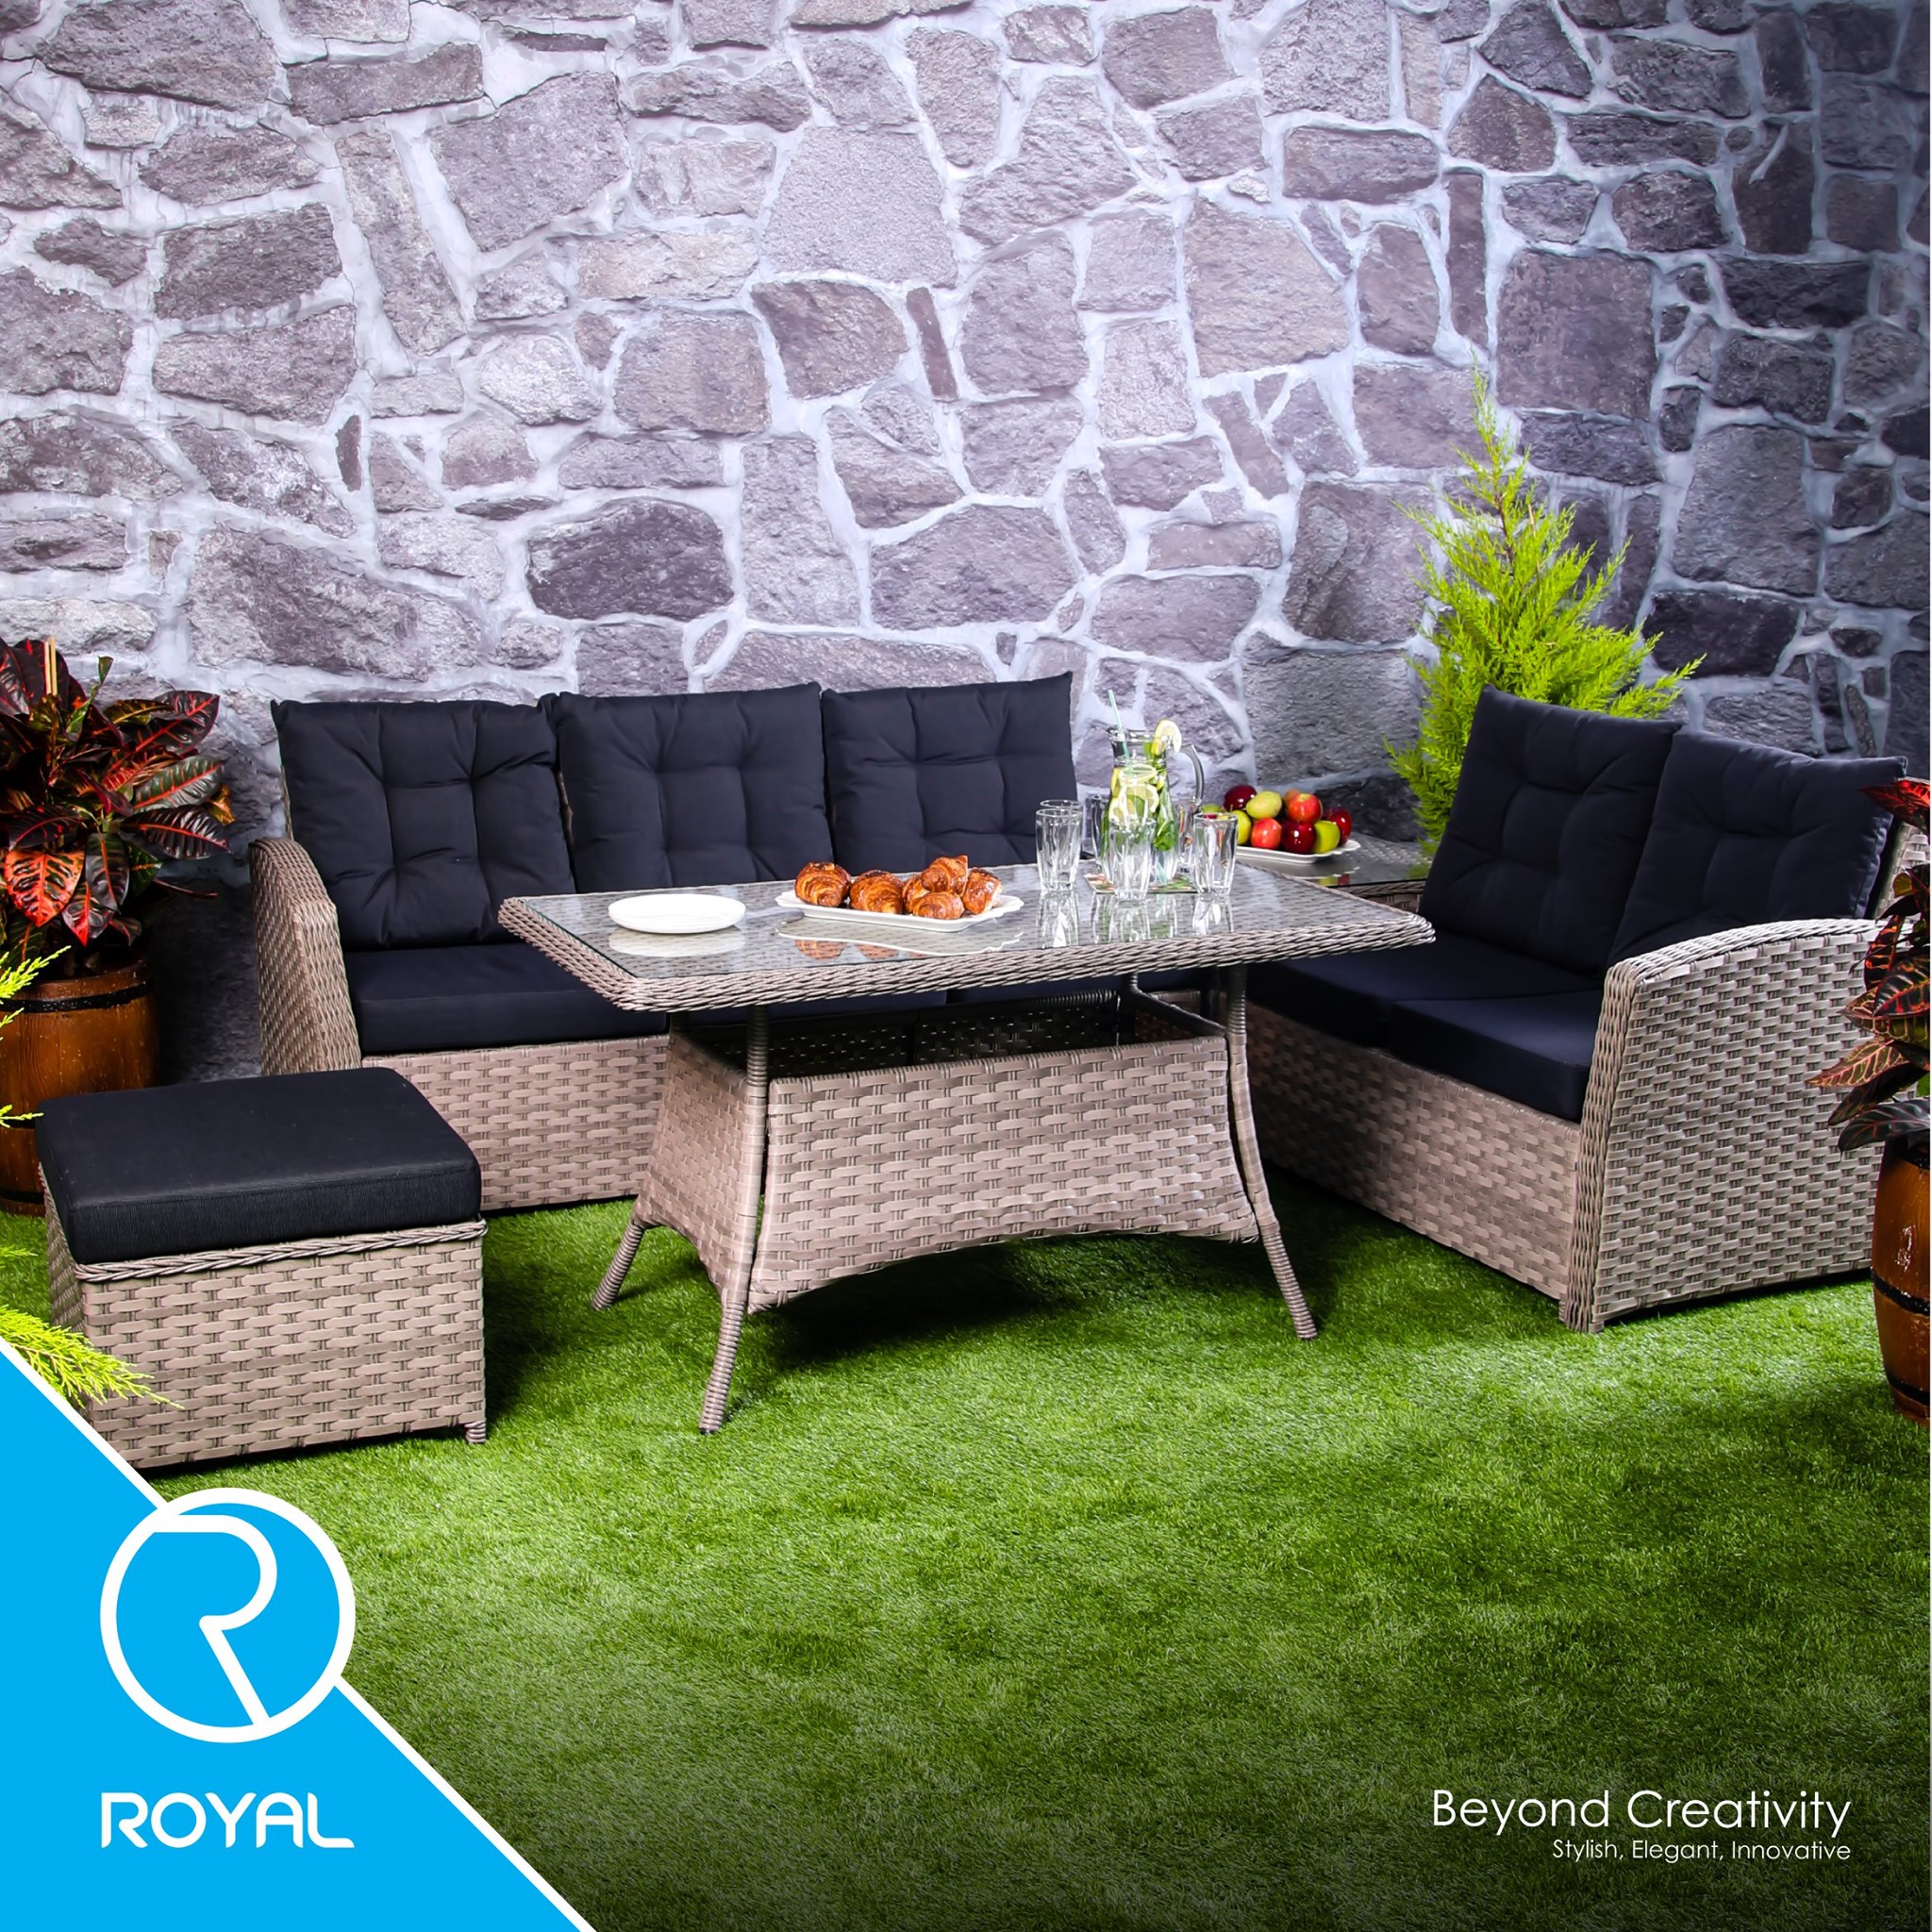 Royal provides a variety of gardens and gardens